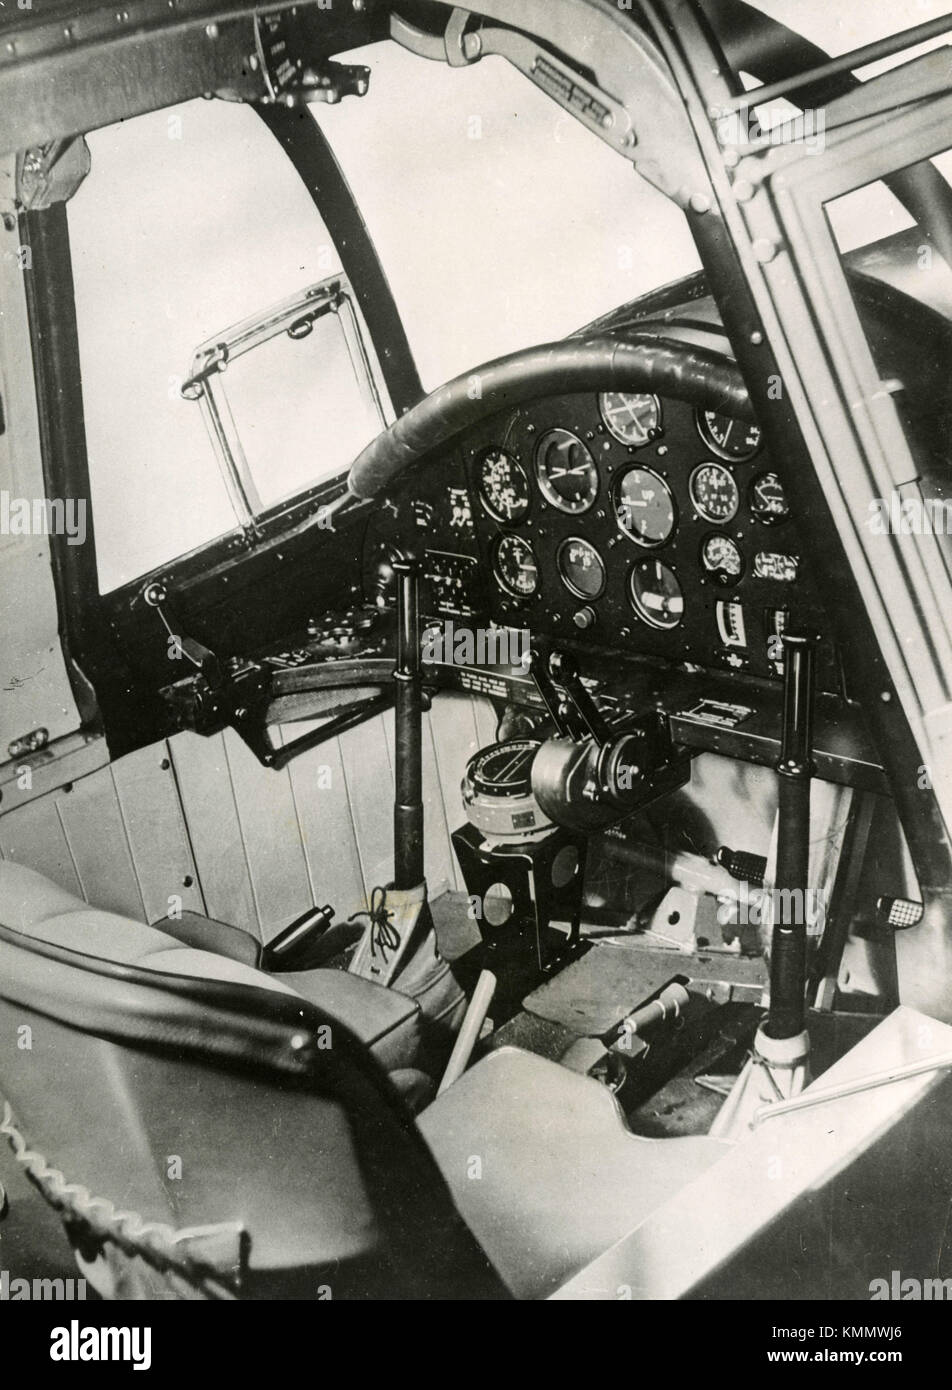 Instument panel of Percival Proctor 5 aircraft, UK 1940s Stock Photo